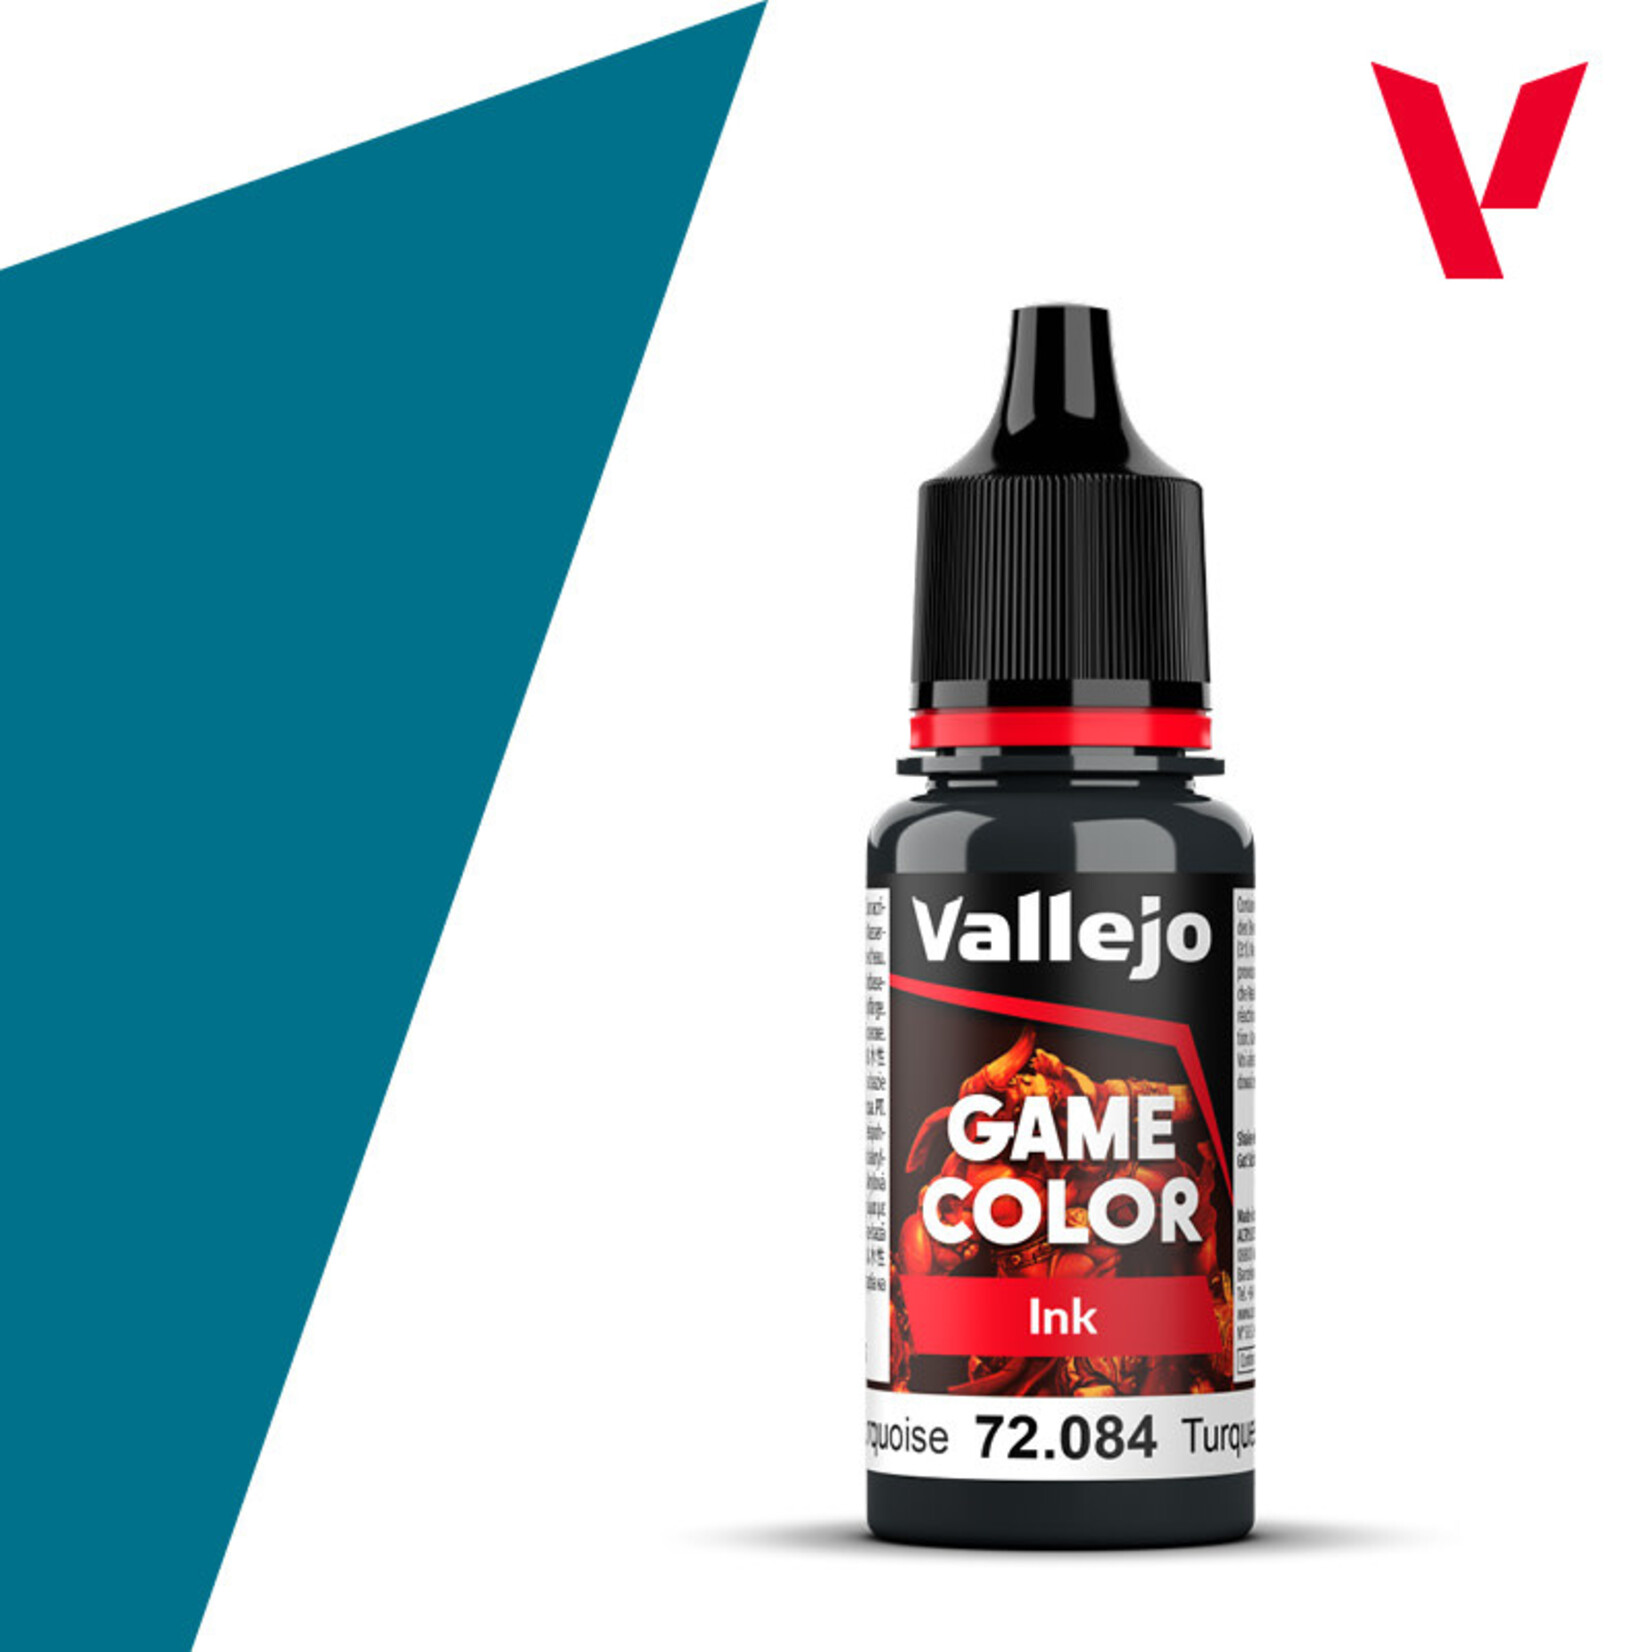 Vallejo Game Color Ink Dark Turquoise